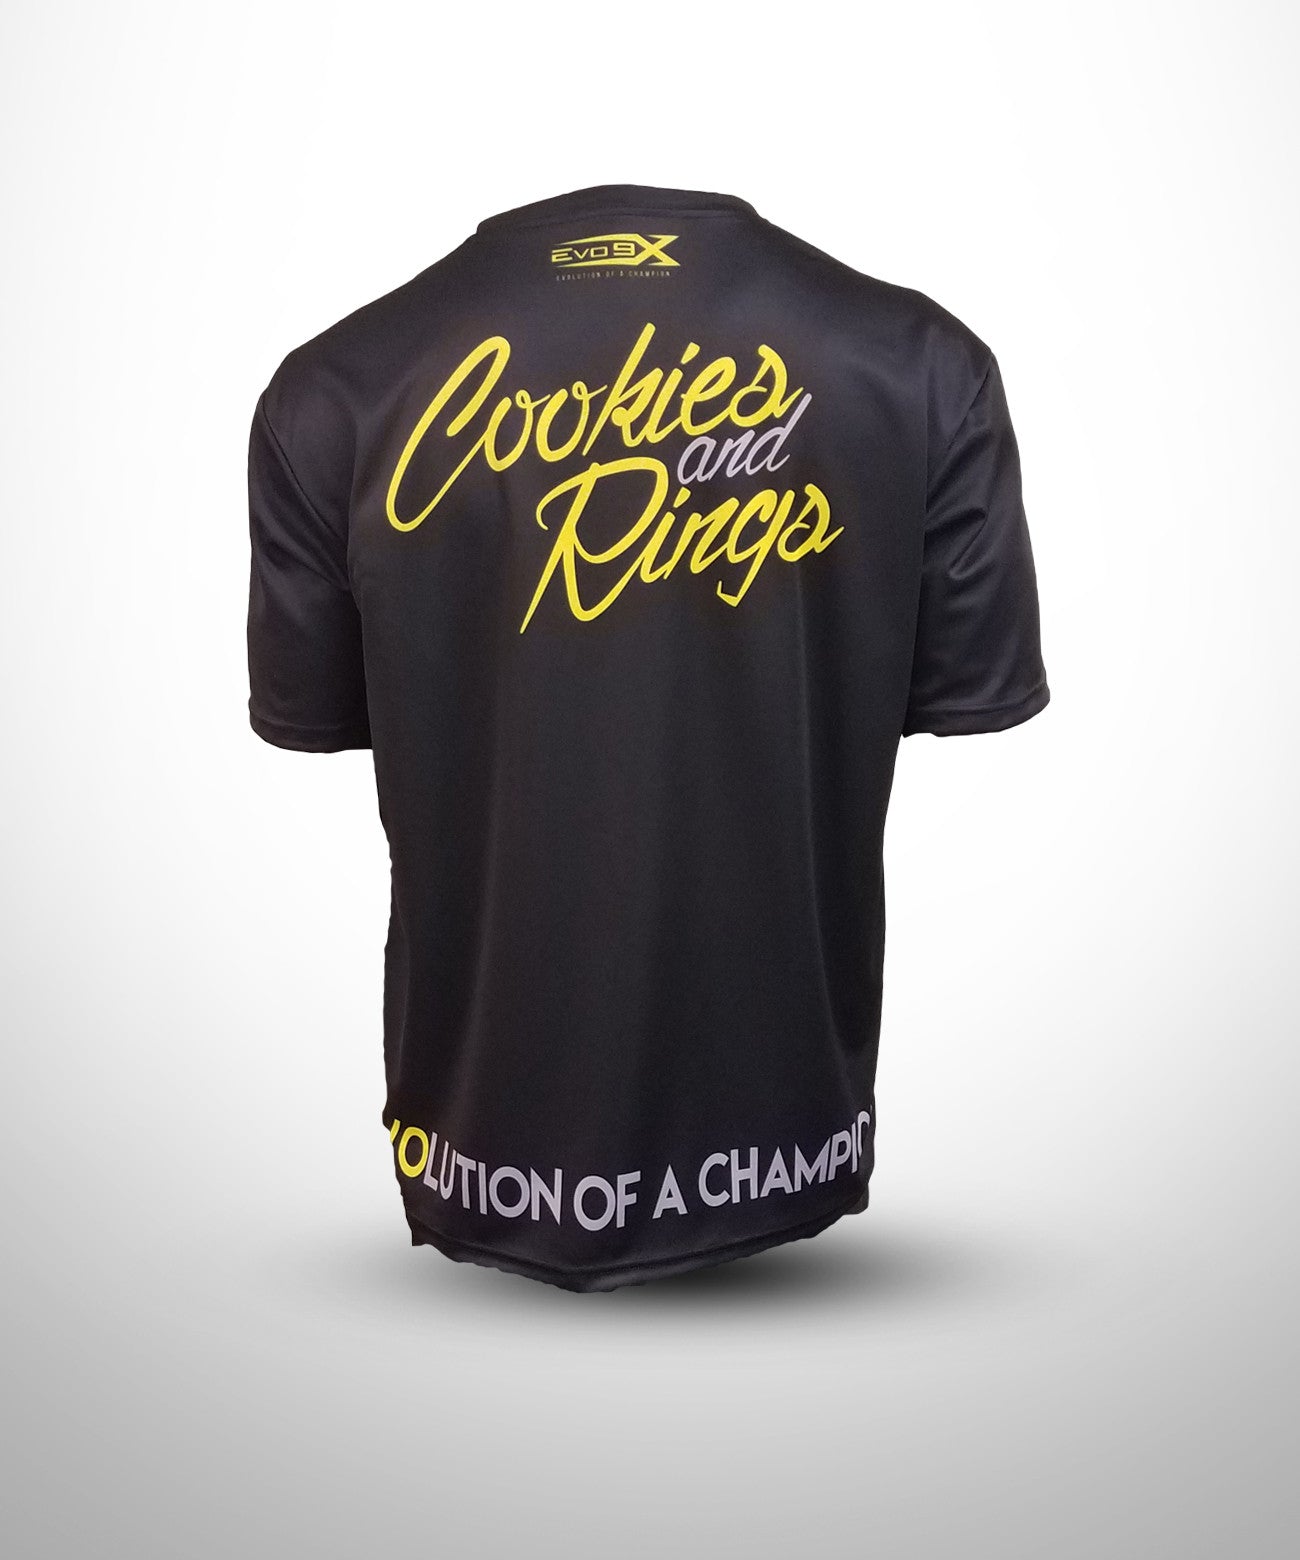 sublimated Jersey - Evo9x Store